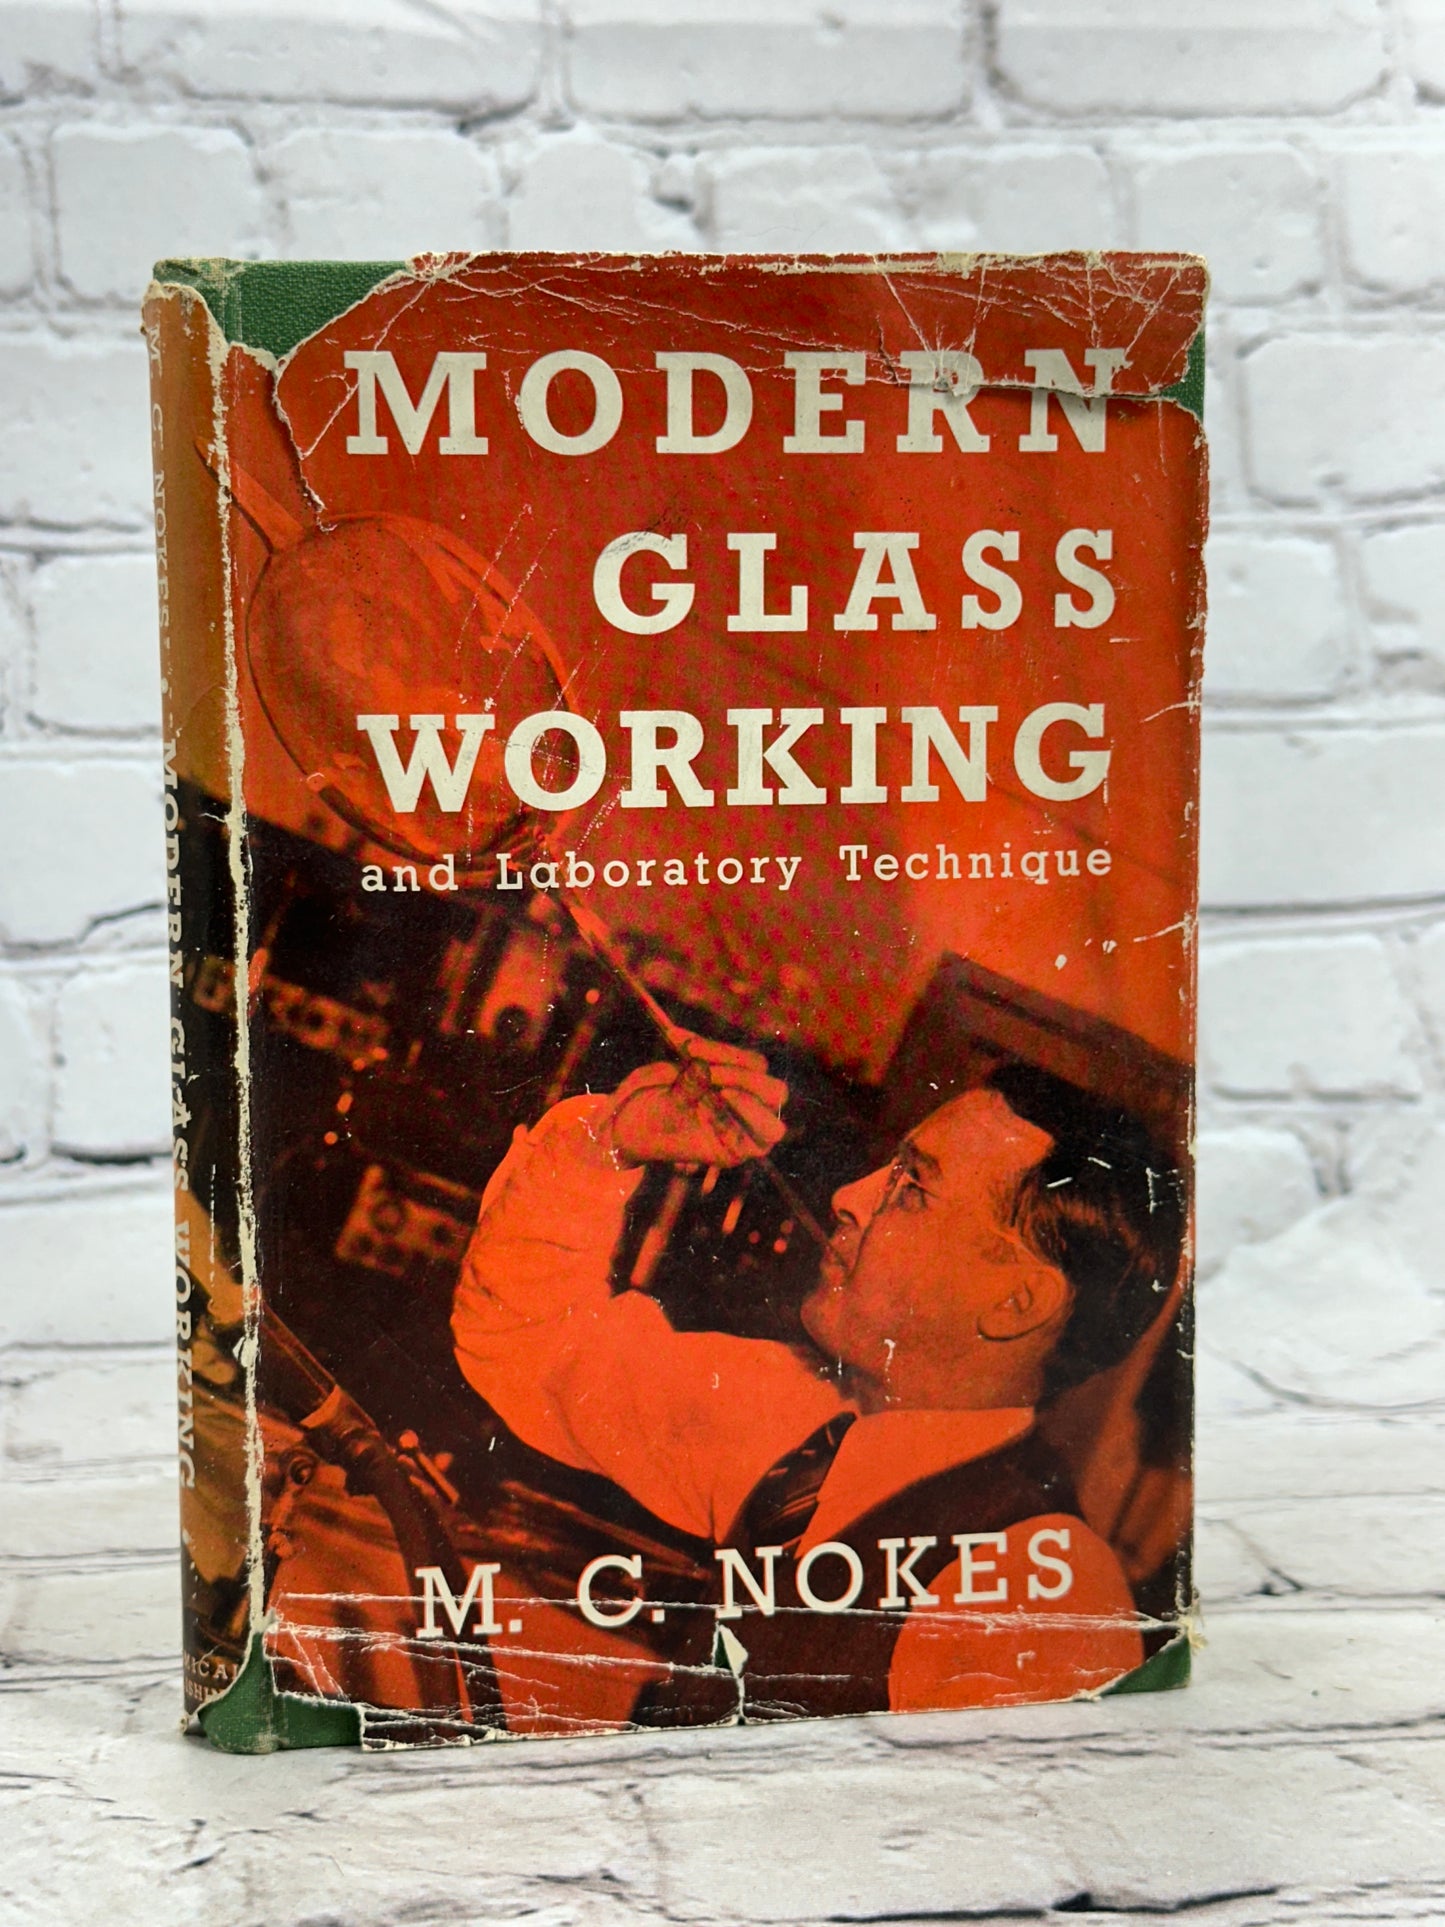 Modern Glass Working and Laboratory Technique By M. C. Nokes [1950]